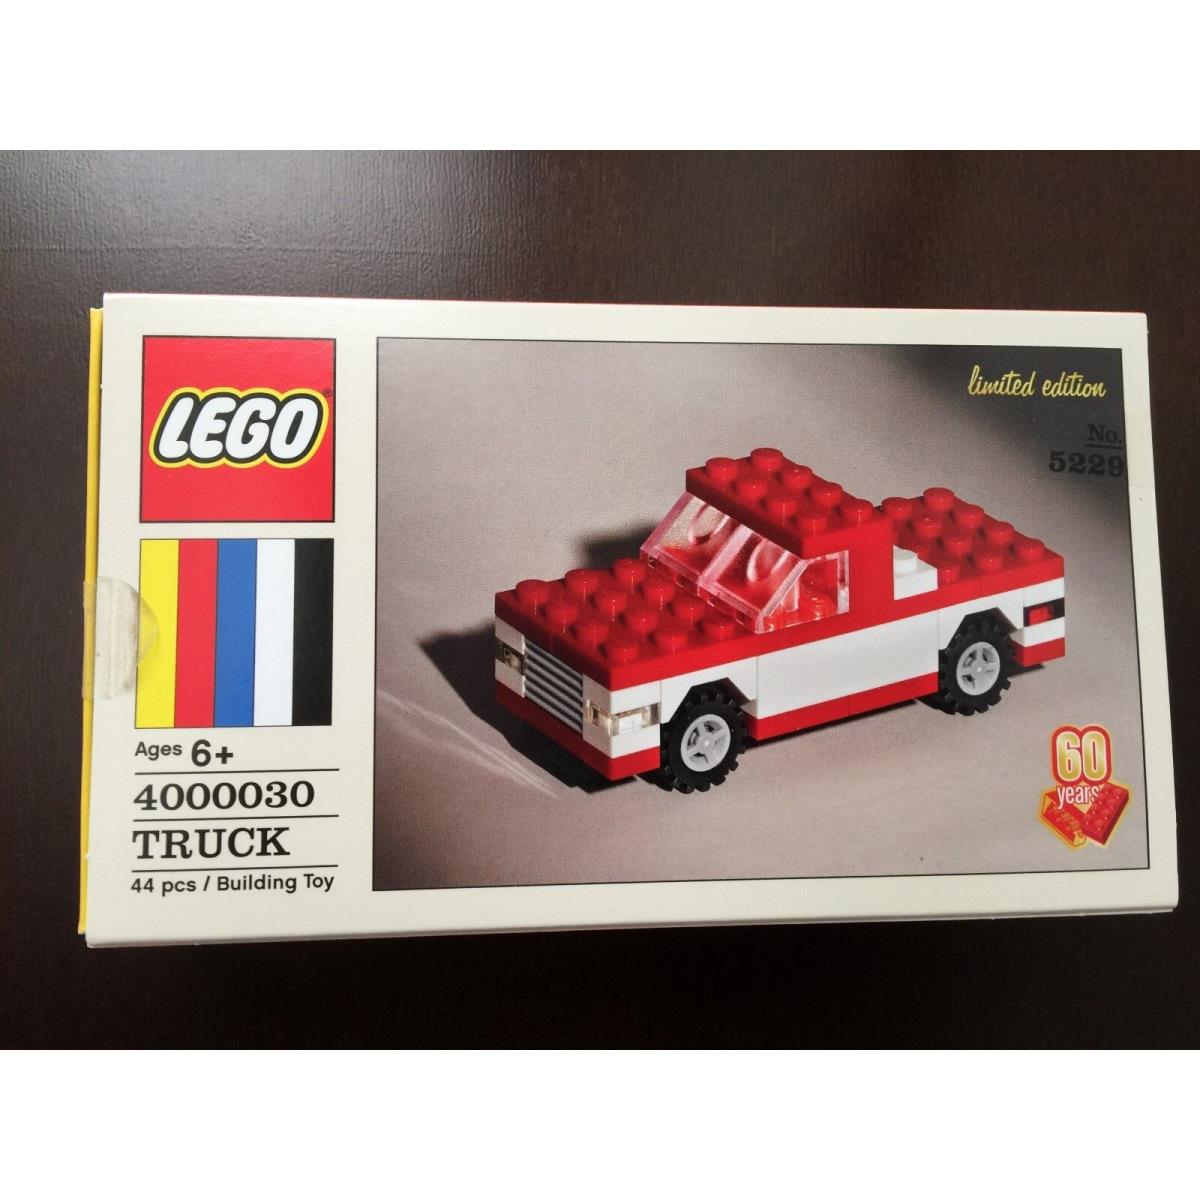 Lego Classic 60th Anniversary Limited Edition Truck 4000030